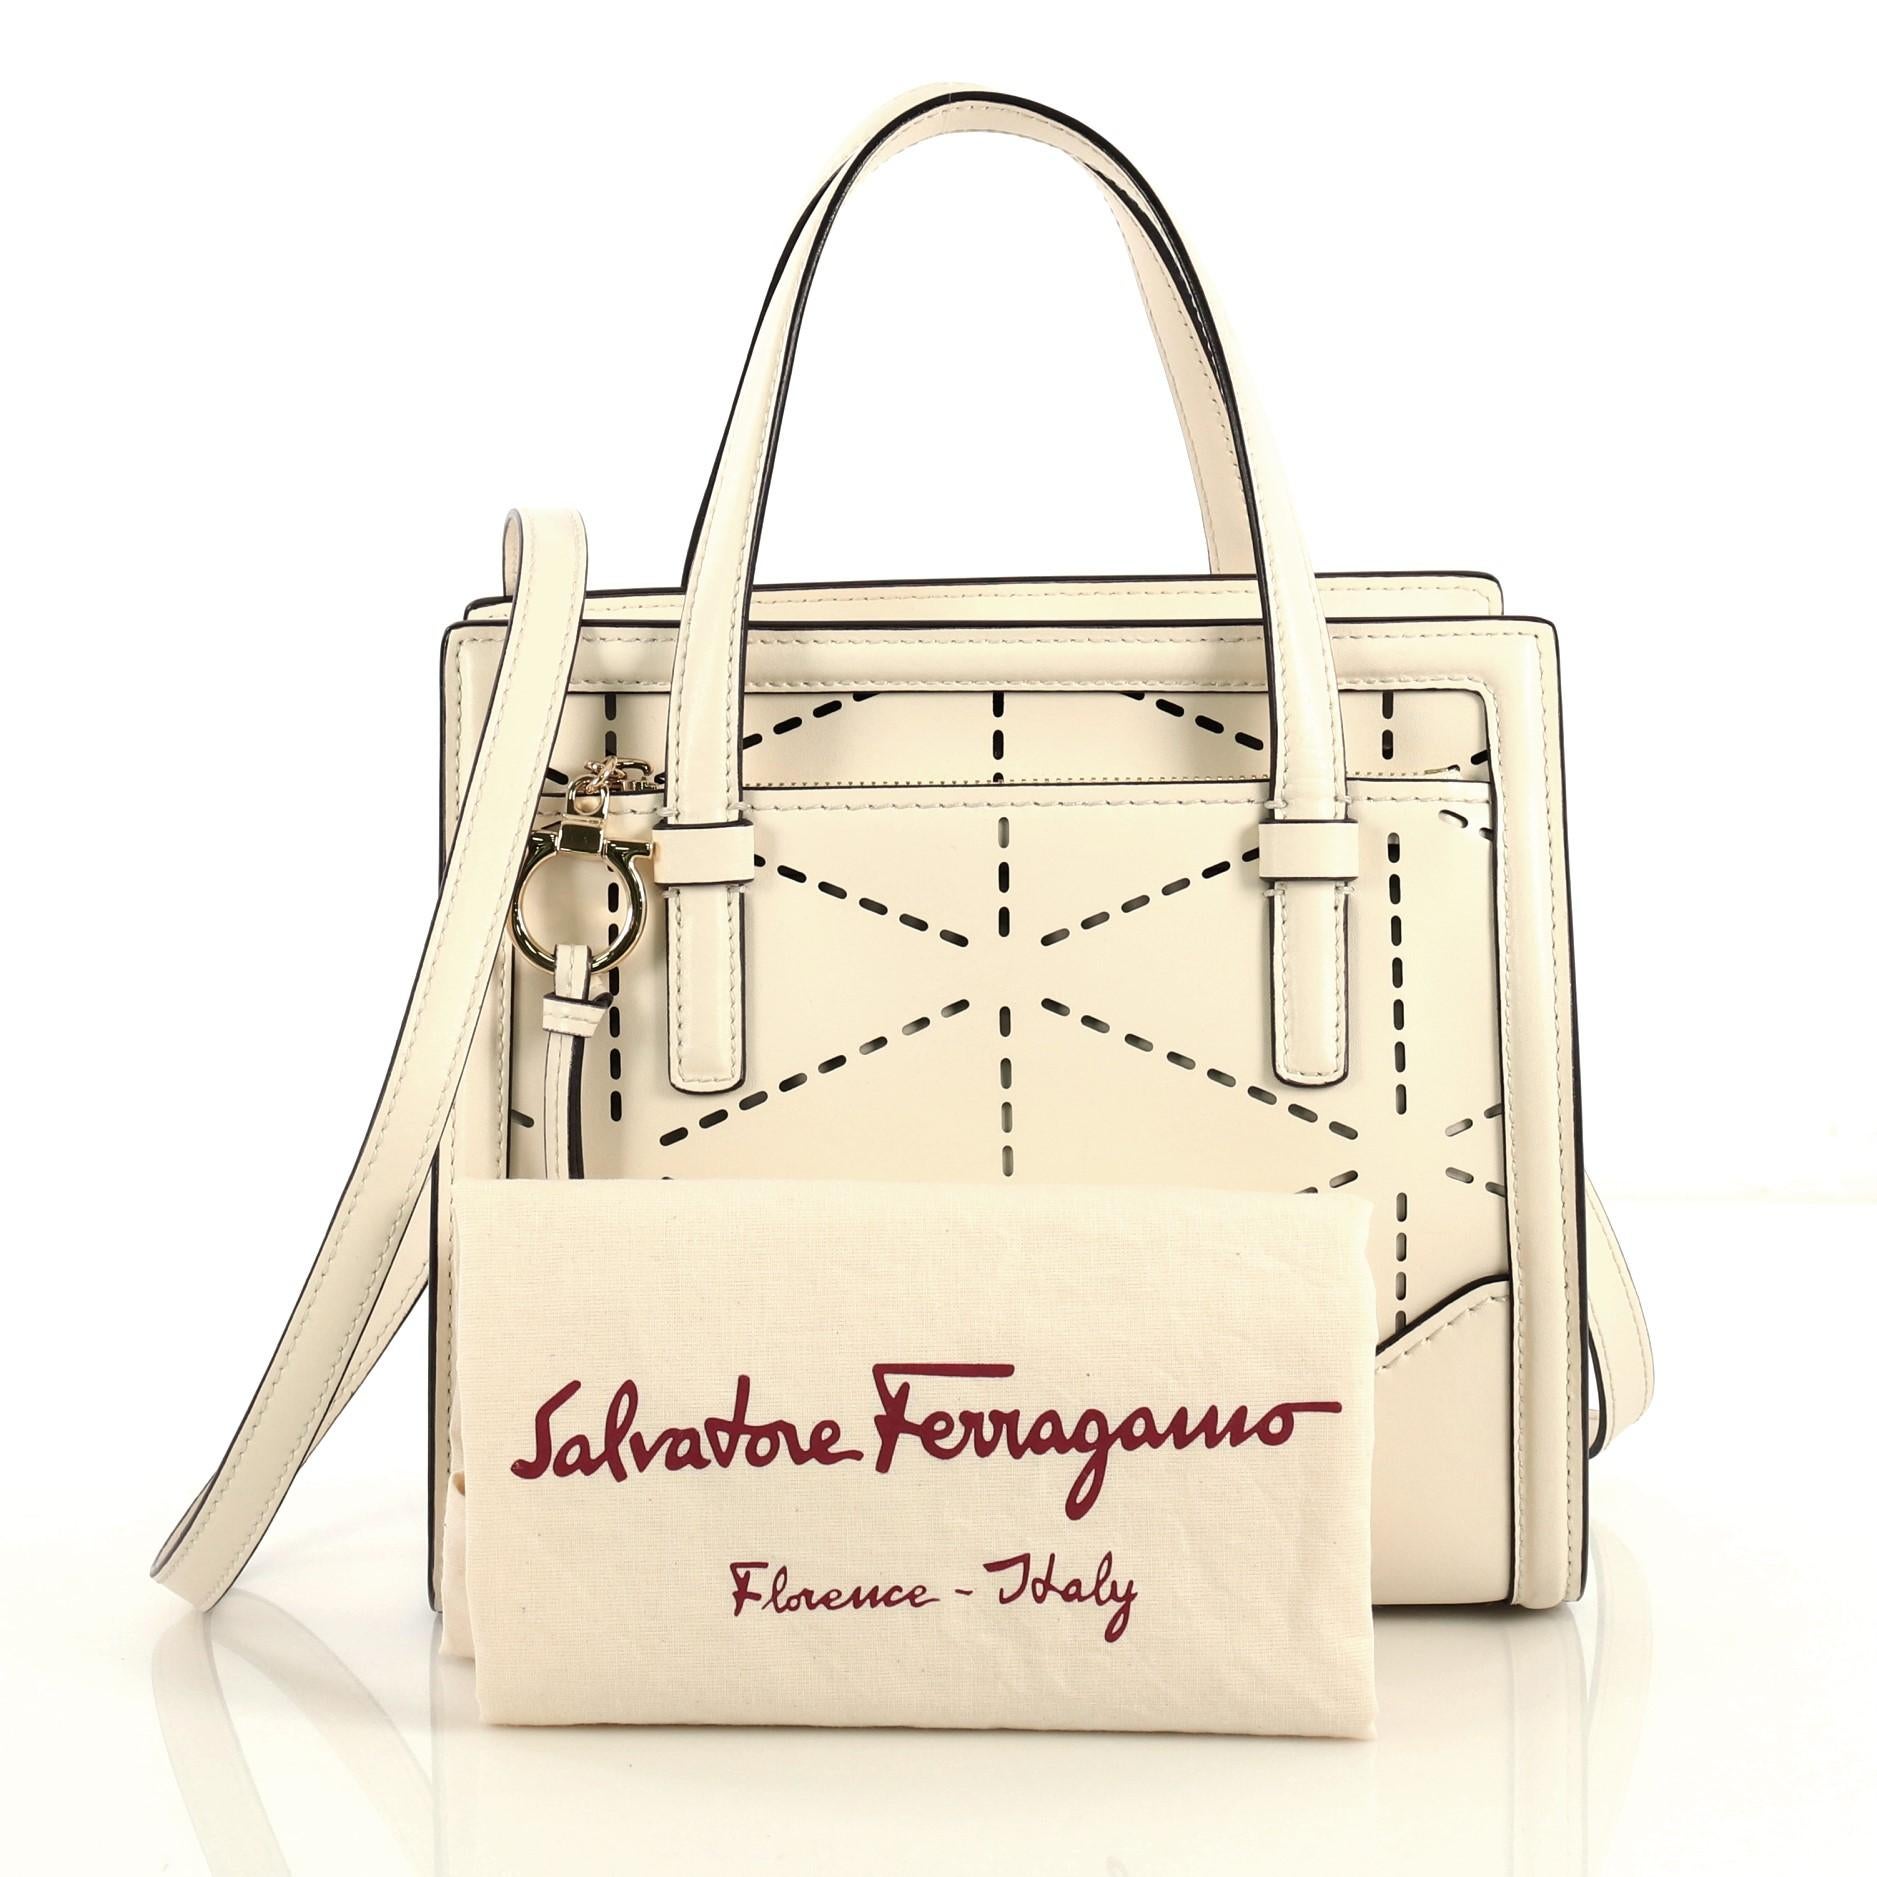 This Salvatore Ferragamo Amy Tote Perforated Leather Mini, crafted from white perforated leather, features dual flat handles, exterior front zip pocket with Gancio charm zip pull, and gold-tone hardware. Its zip closure opens to a brown leather